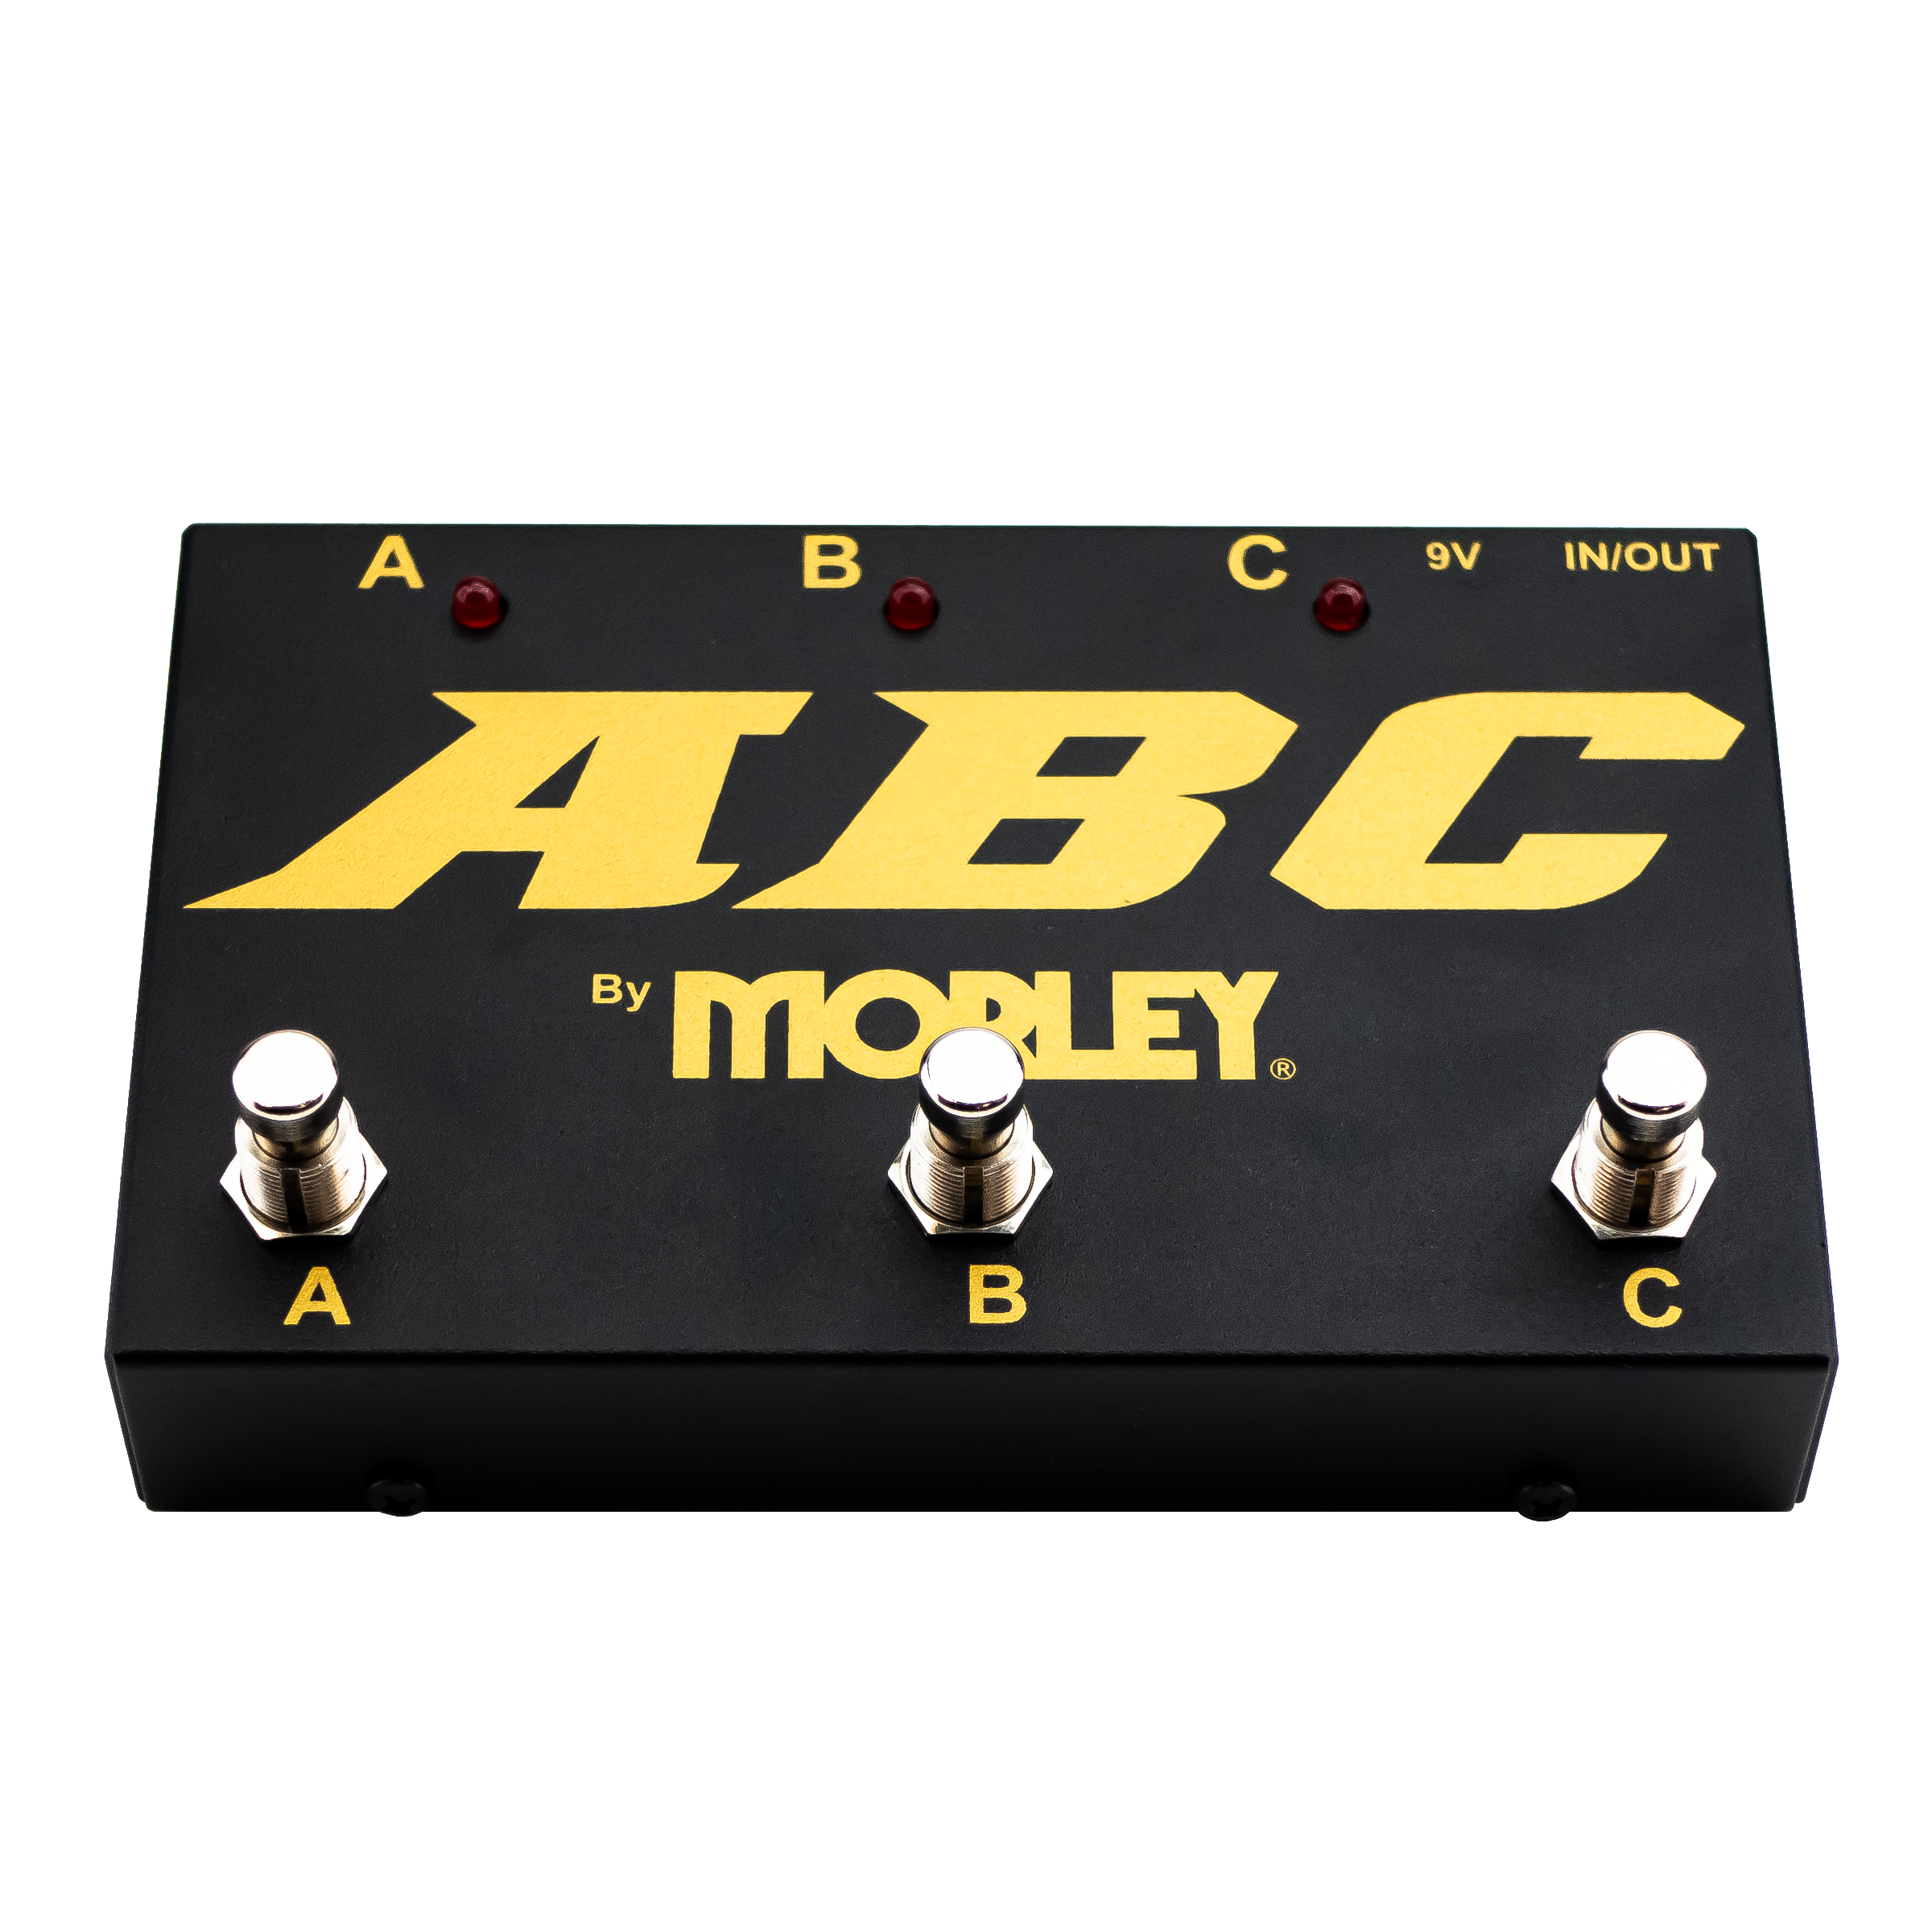 Morley ABC Gold Series Selector/Combiner